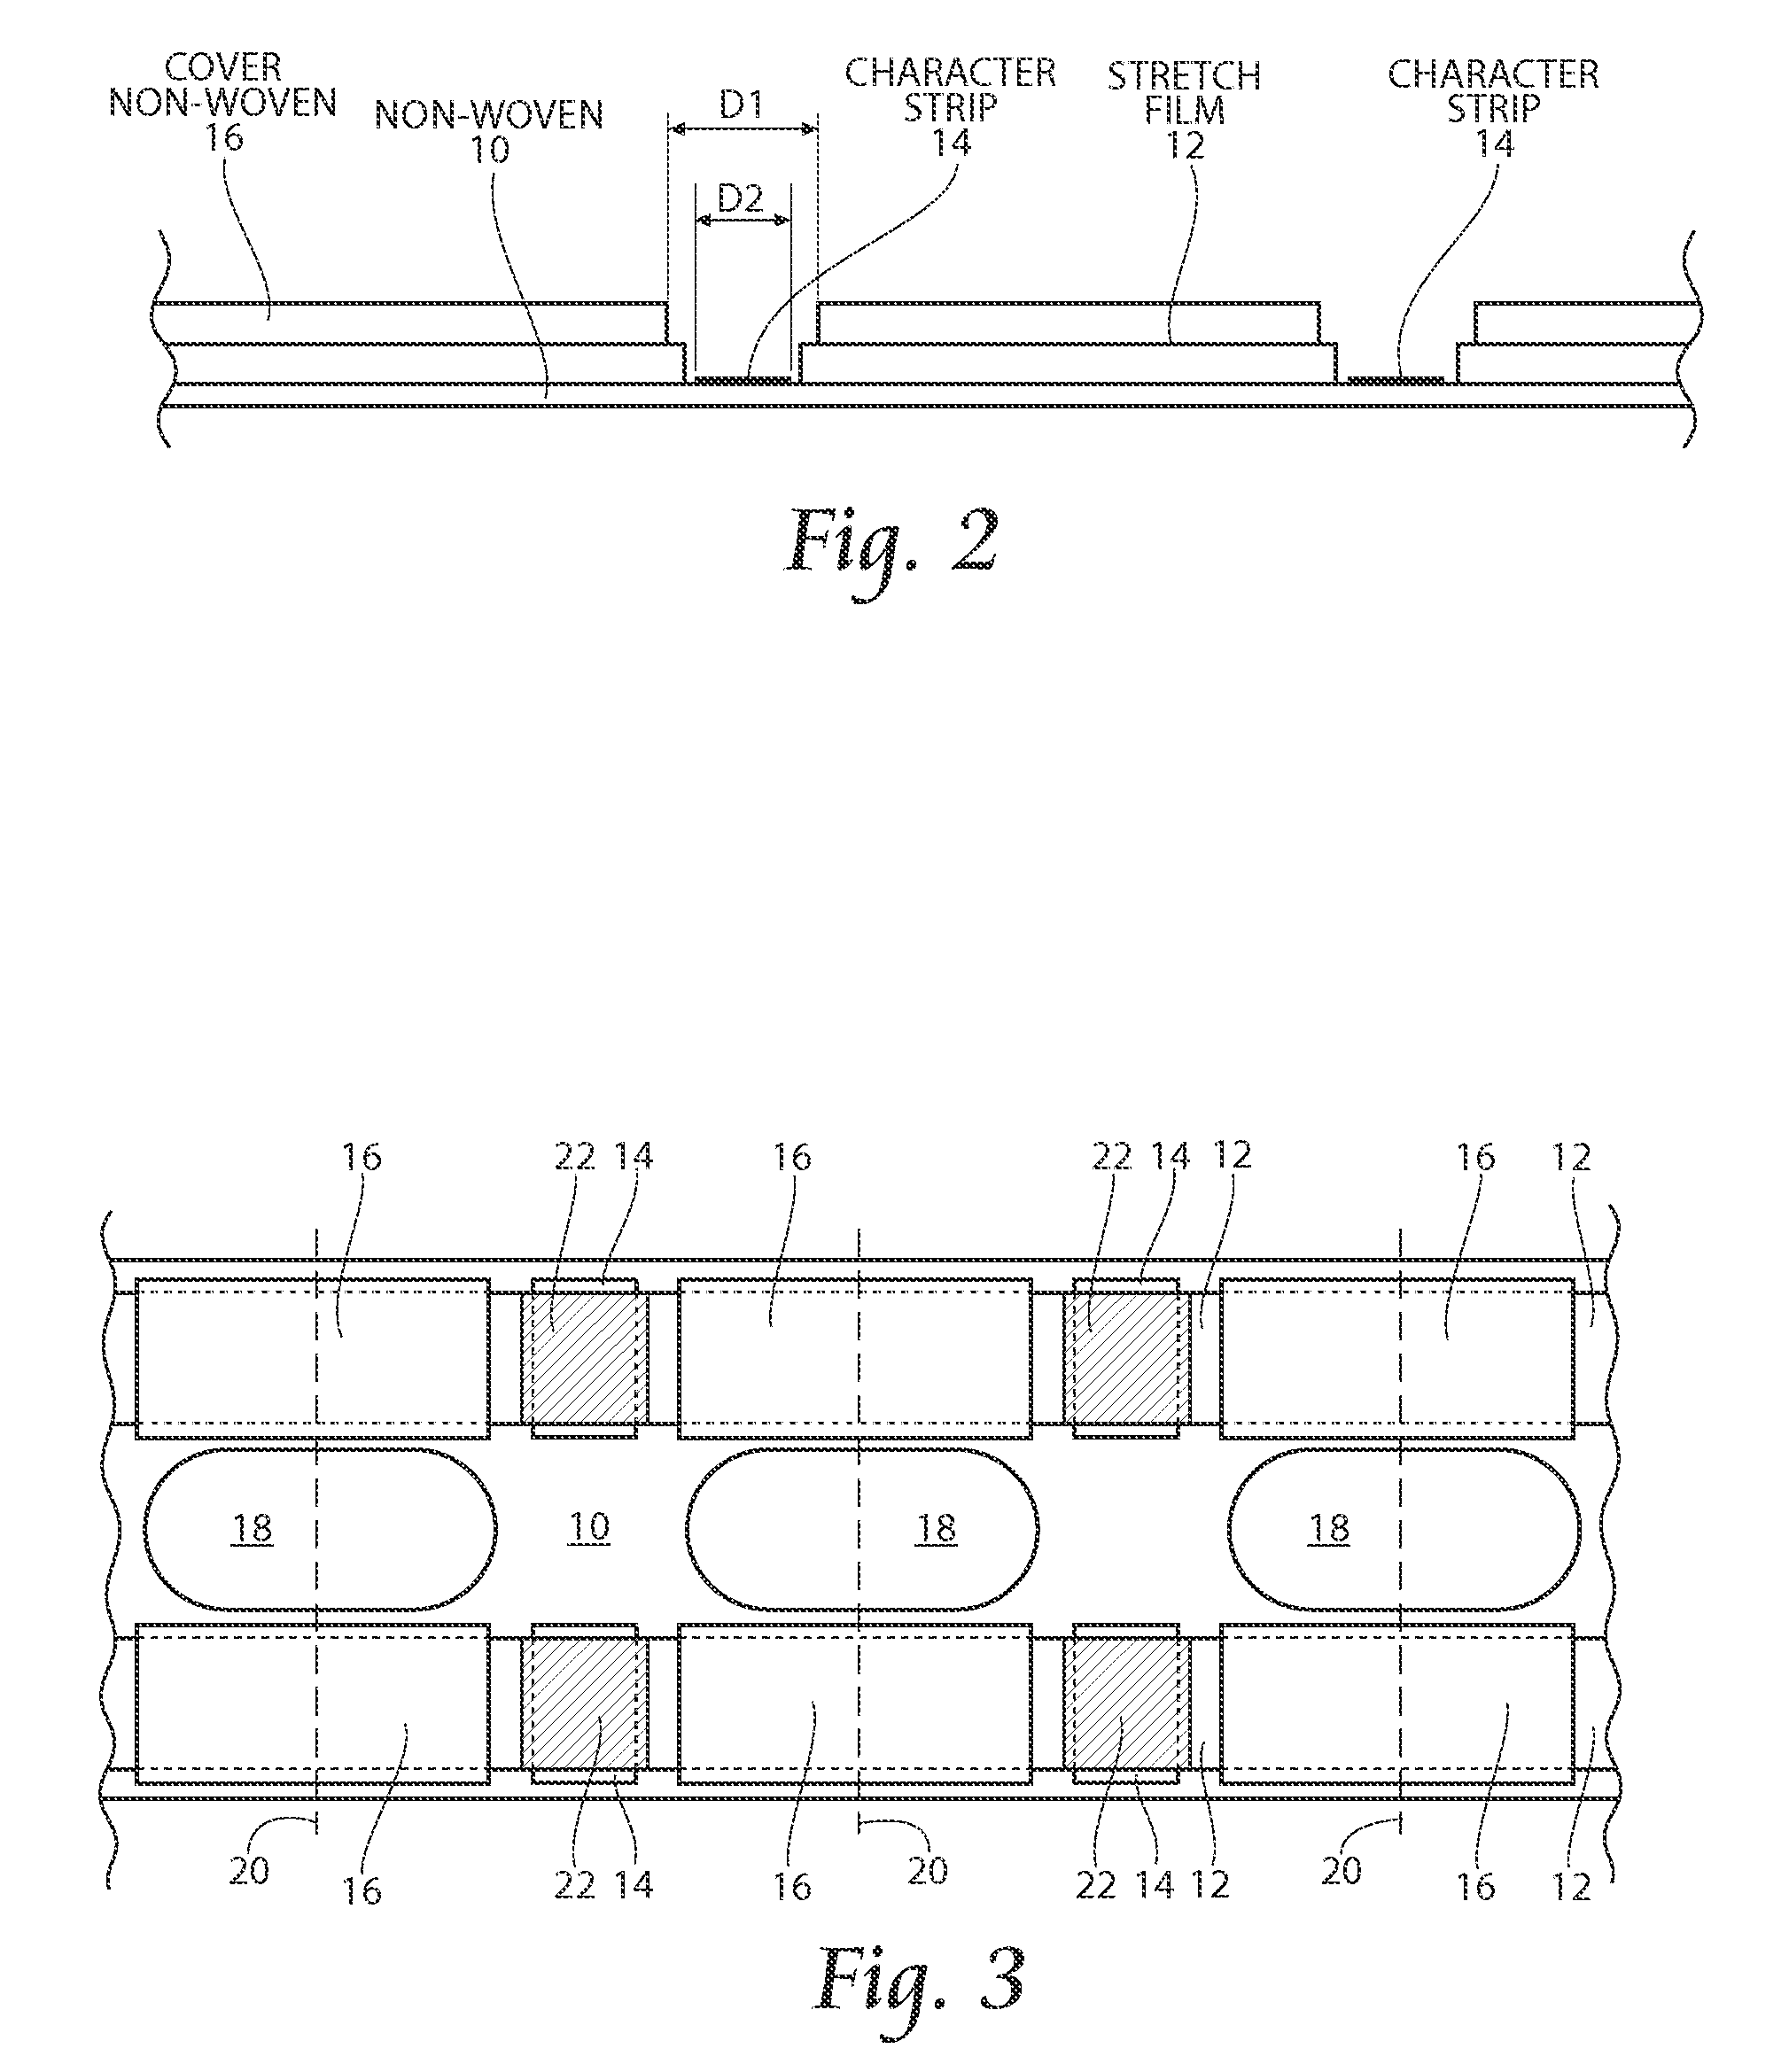 Apparatus and method for producing absorbent article with stretch film side panel and application of intermittent discrete components of an absorbent article